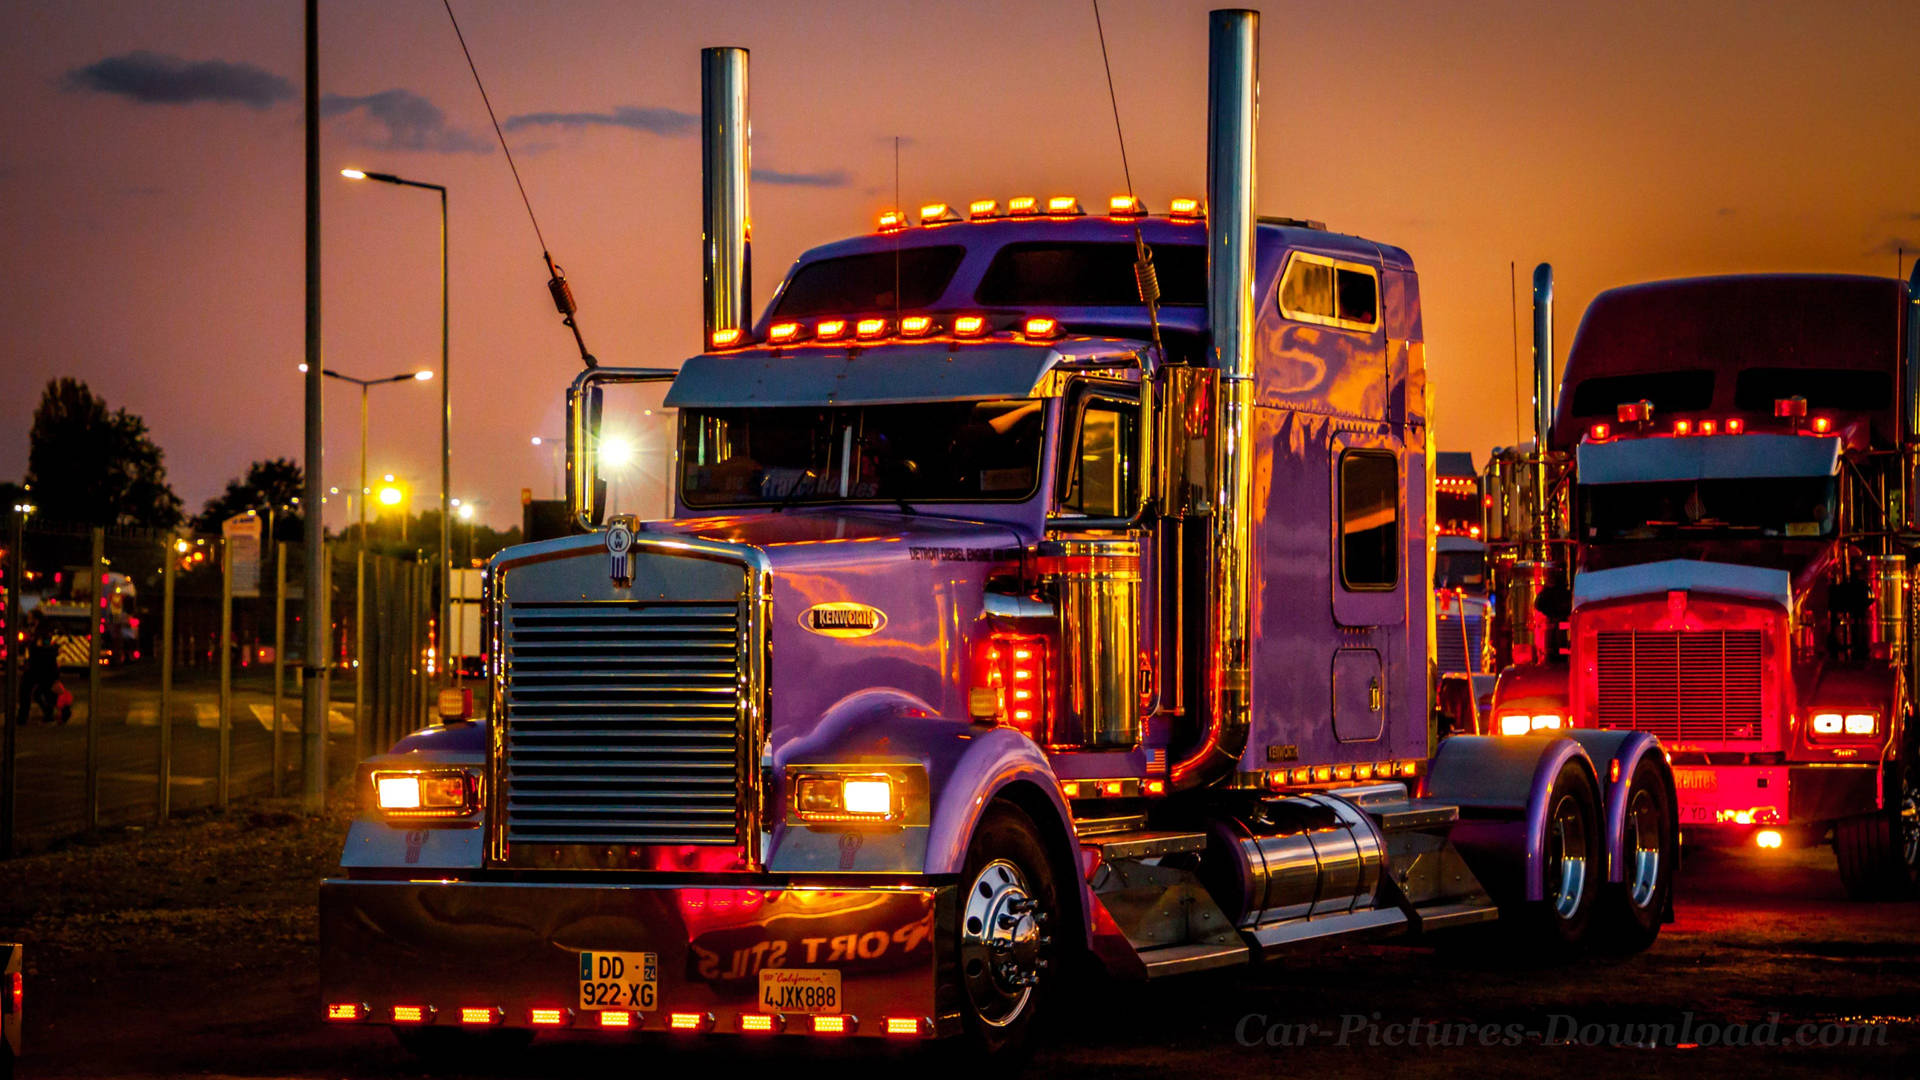 Colorful Cool Truck At Night Background